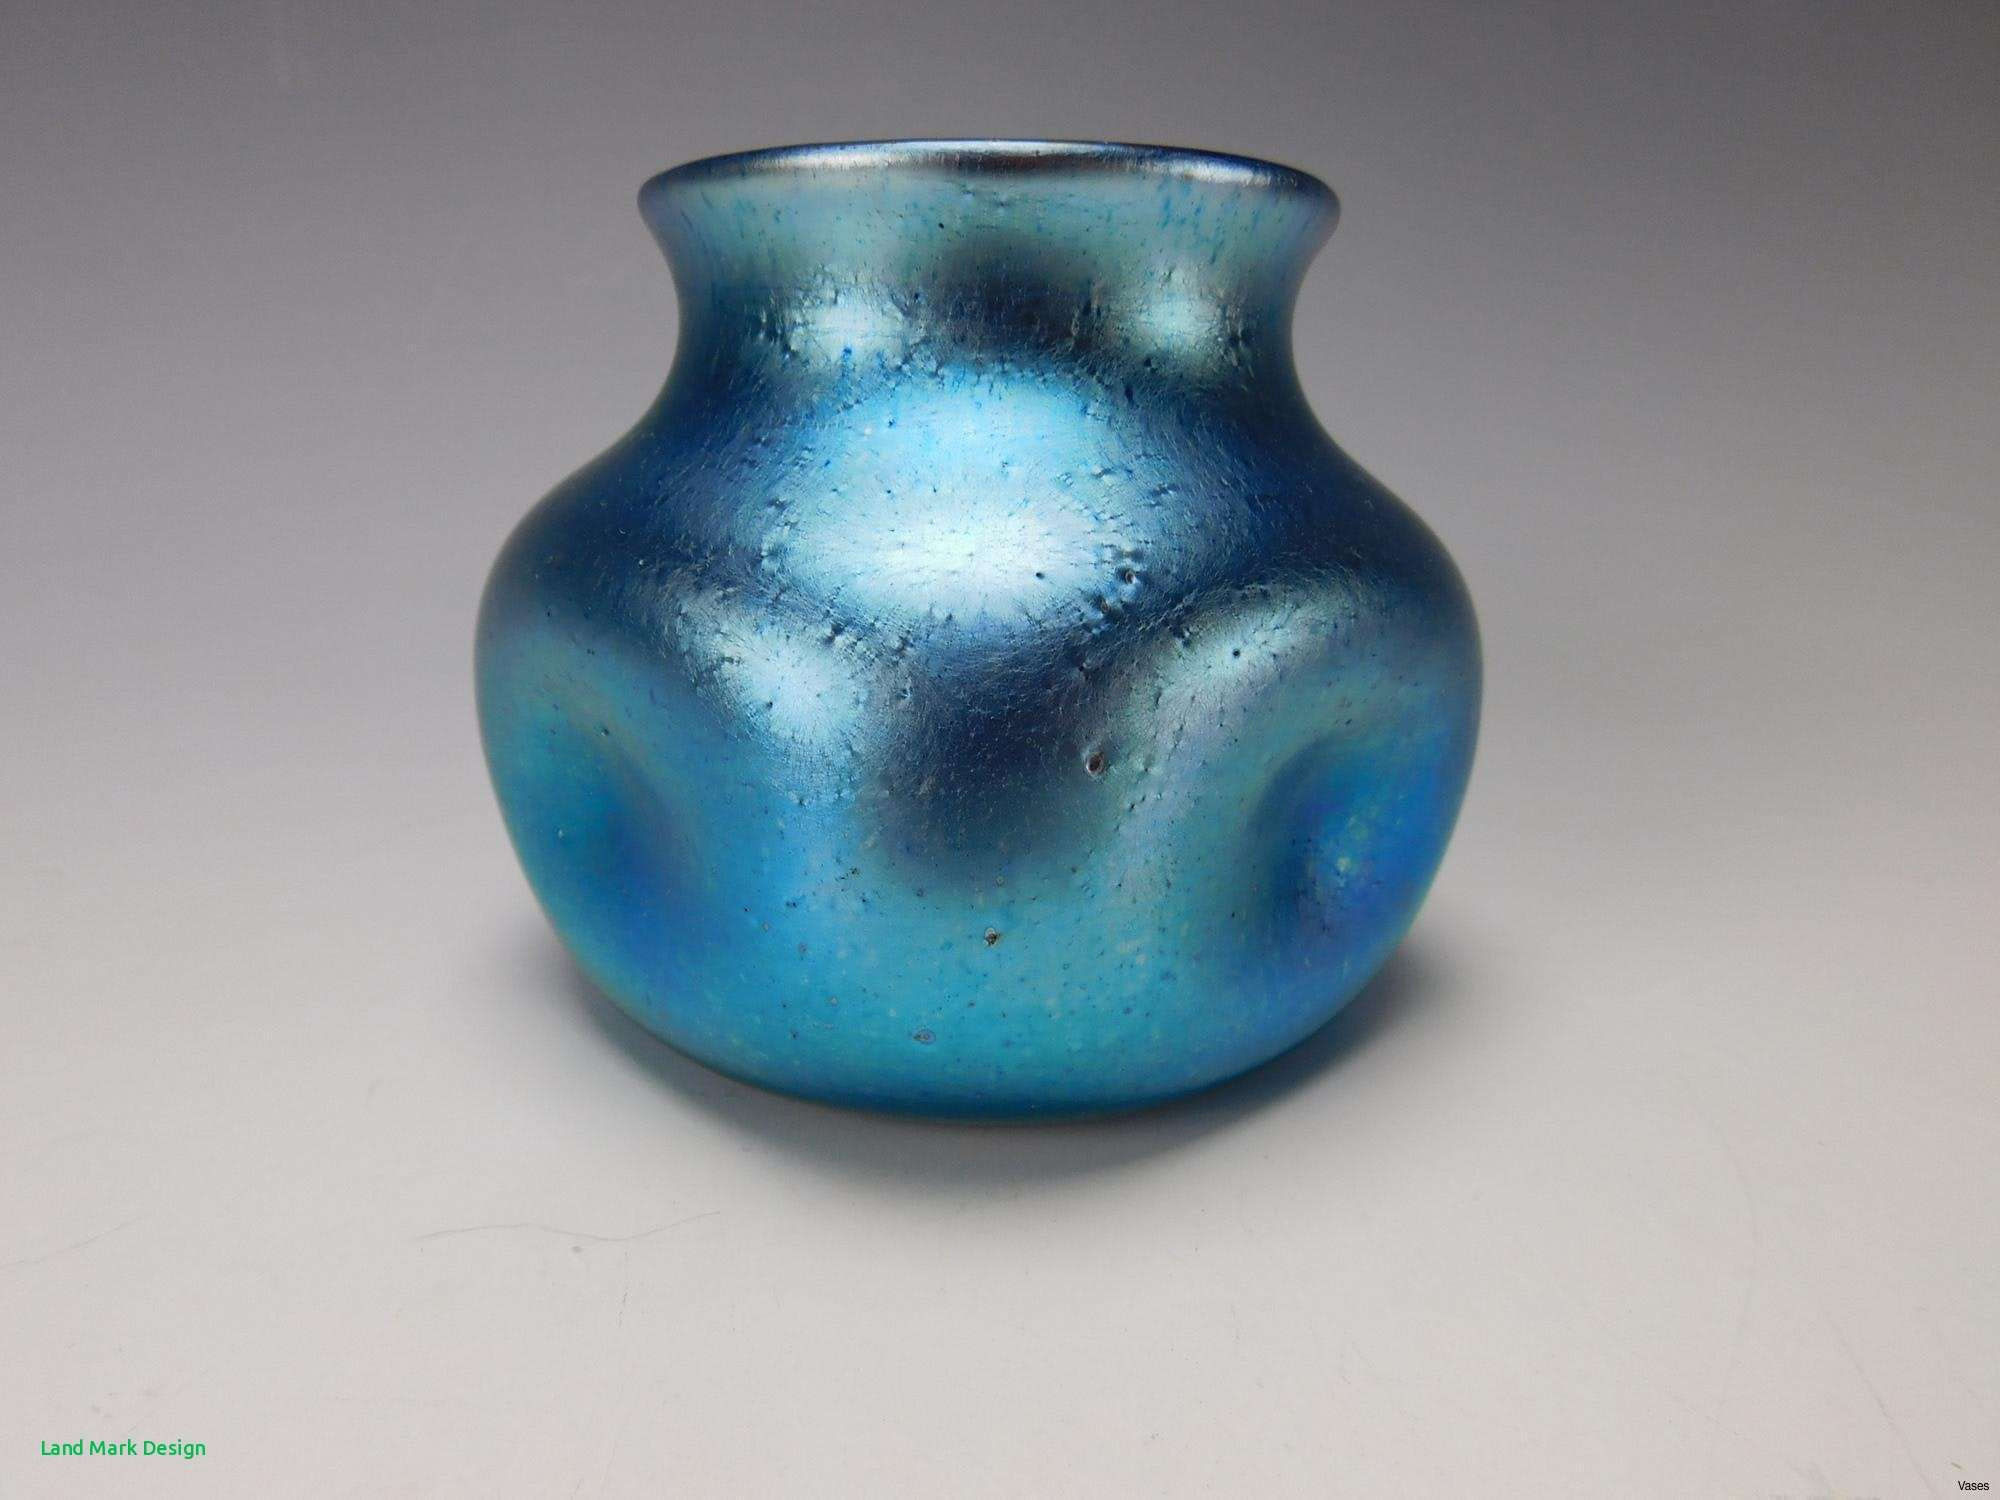 23 Lovable Tiffany Vases for Sale 2023 free download tiffany vases for sale of 37 fenton blue glass vase the weekly world with regard to beige and blue design